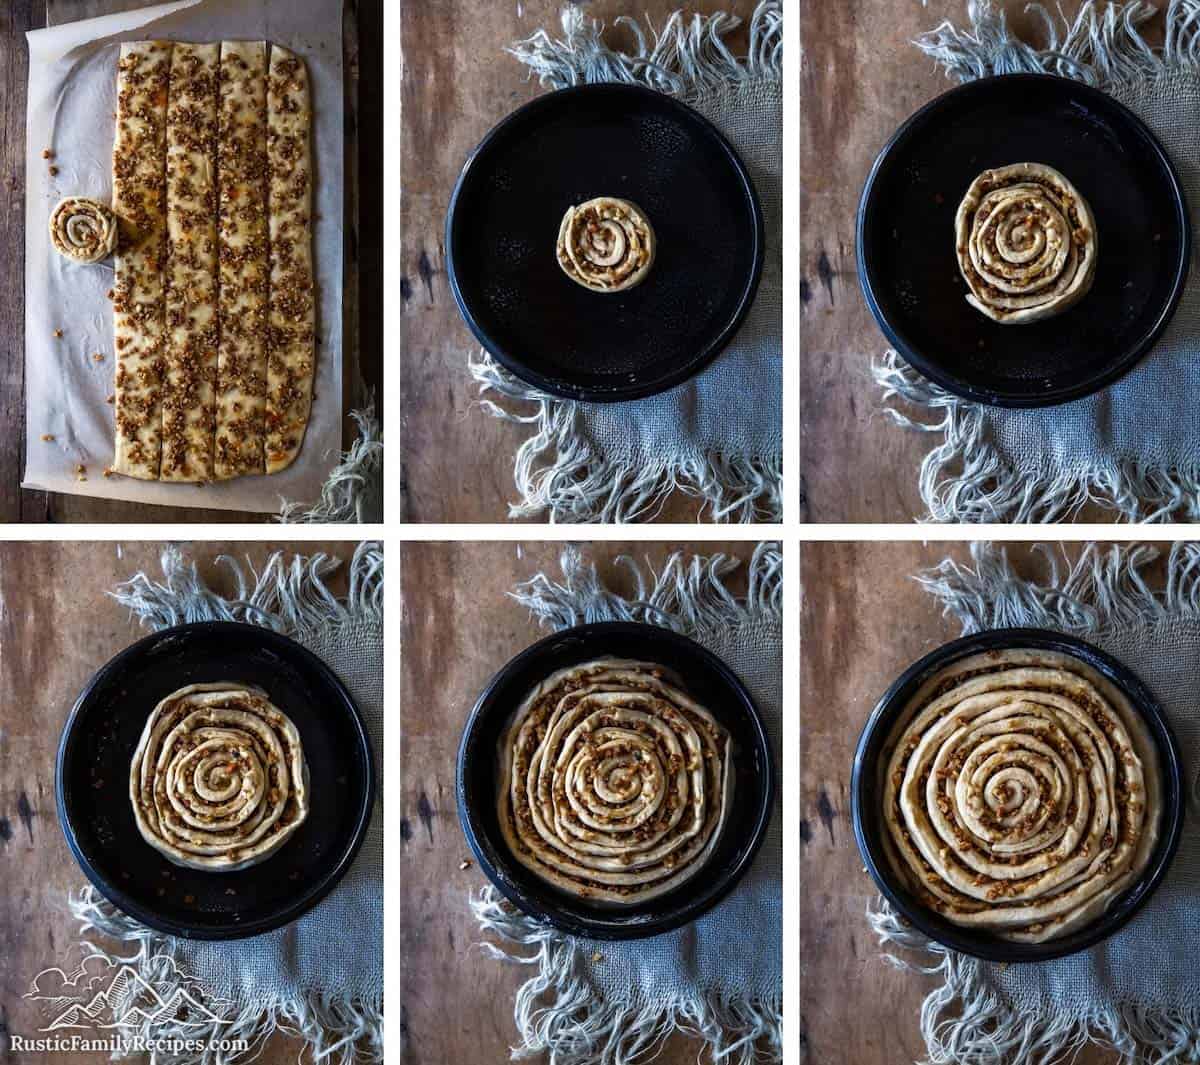 Six photos showing the assembly of spiral coffee cake